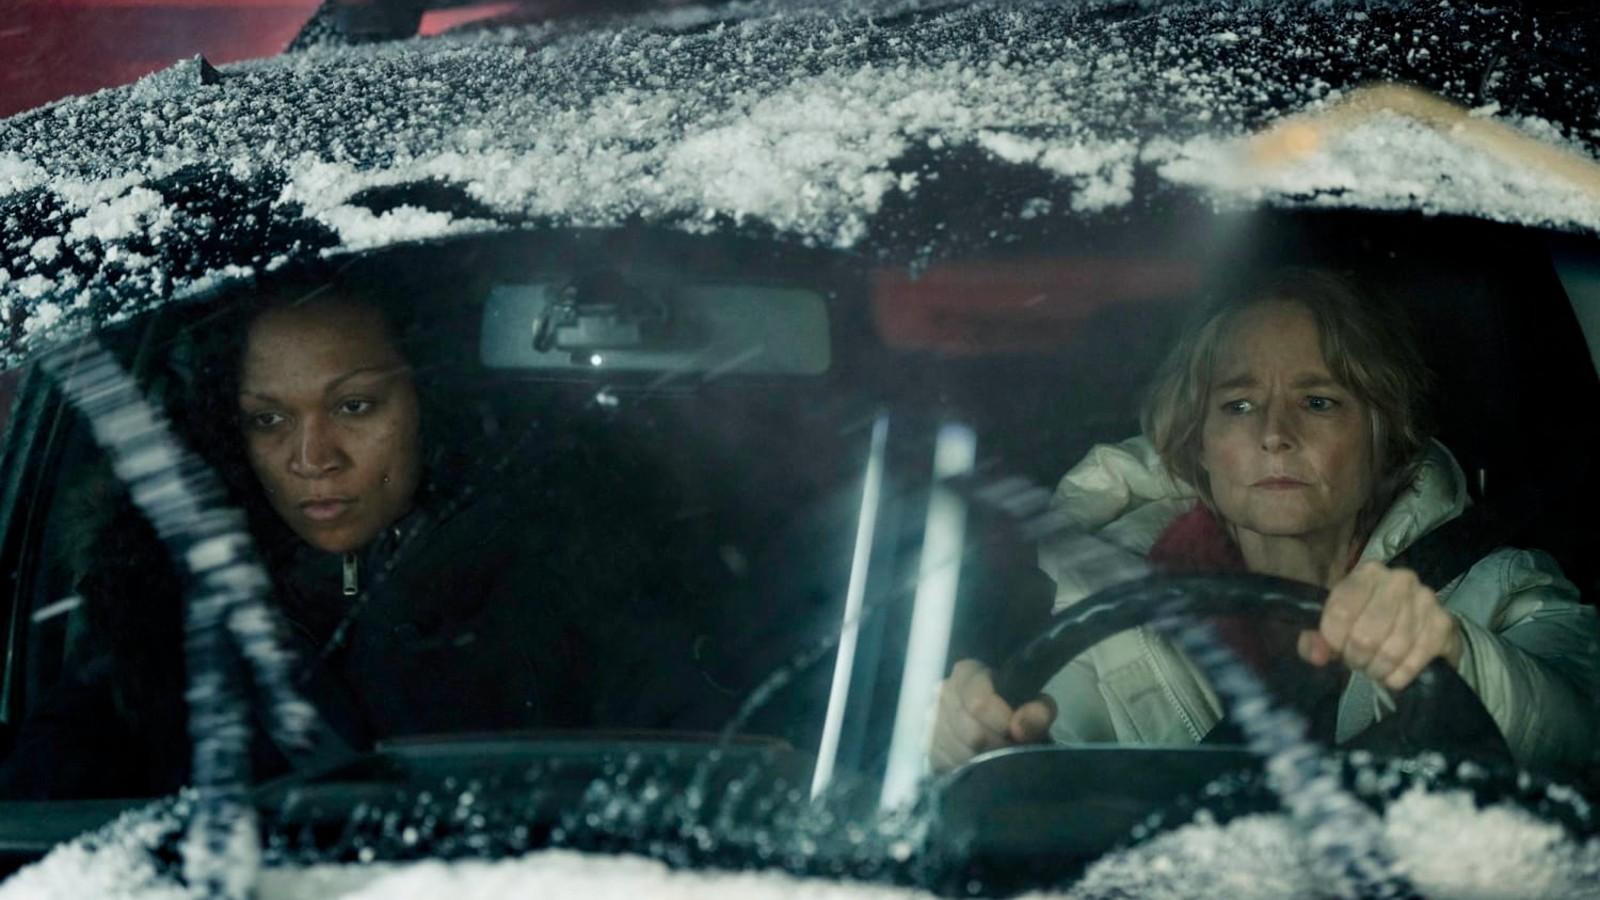 Kali Reis and Jodie Foster in a car in True Detective Season 4.